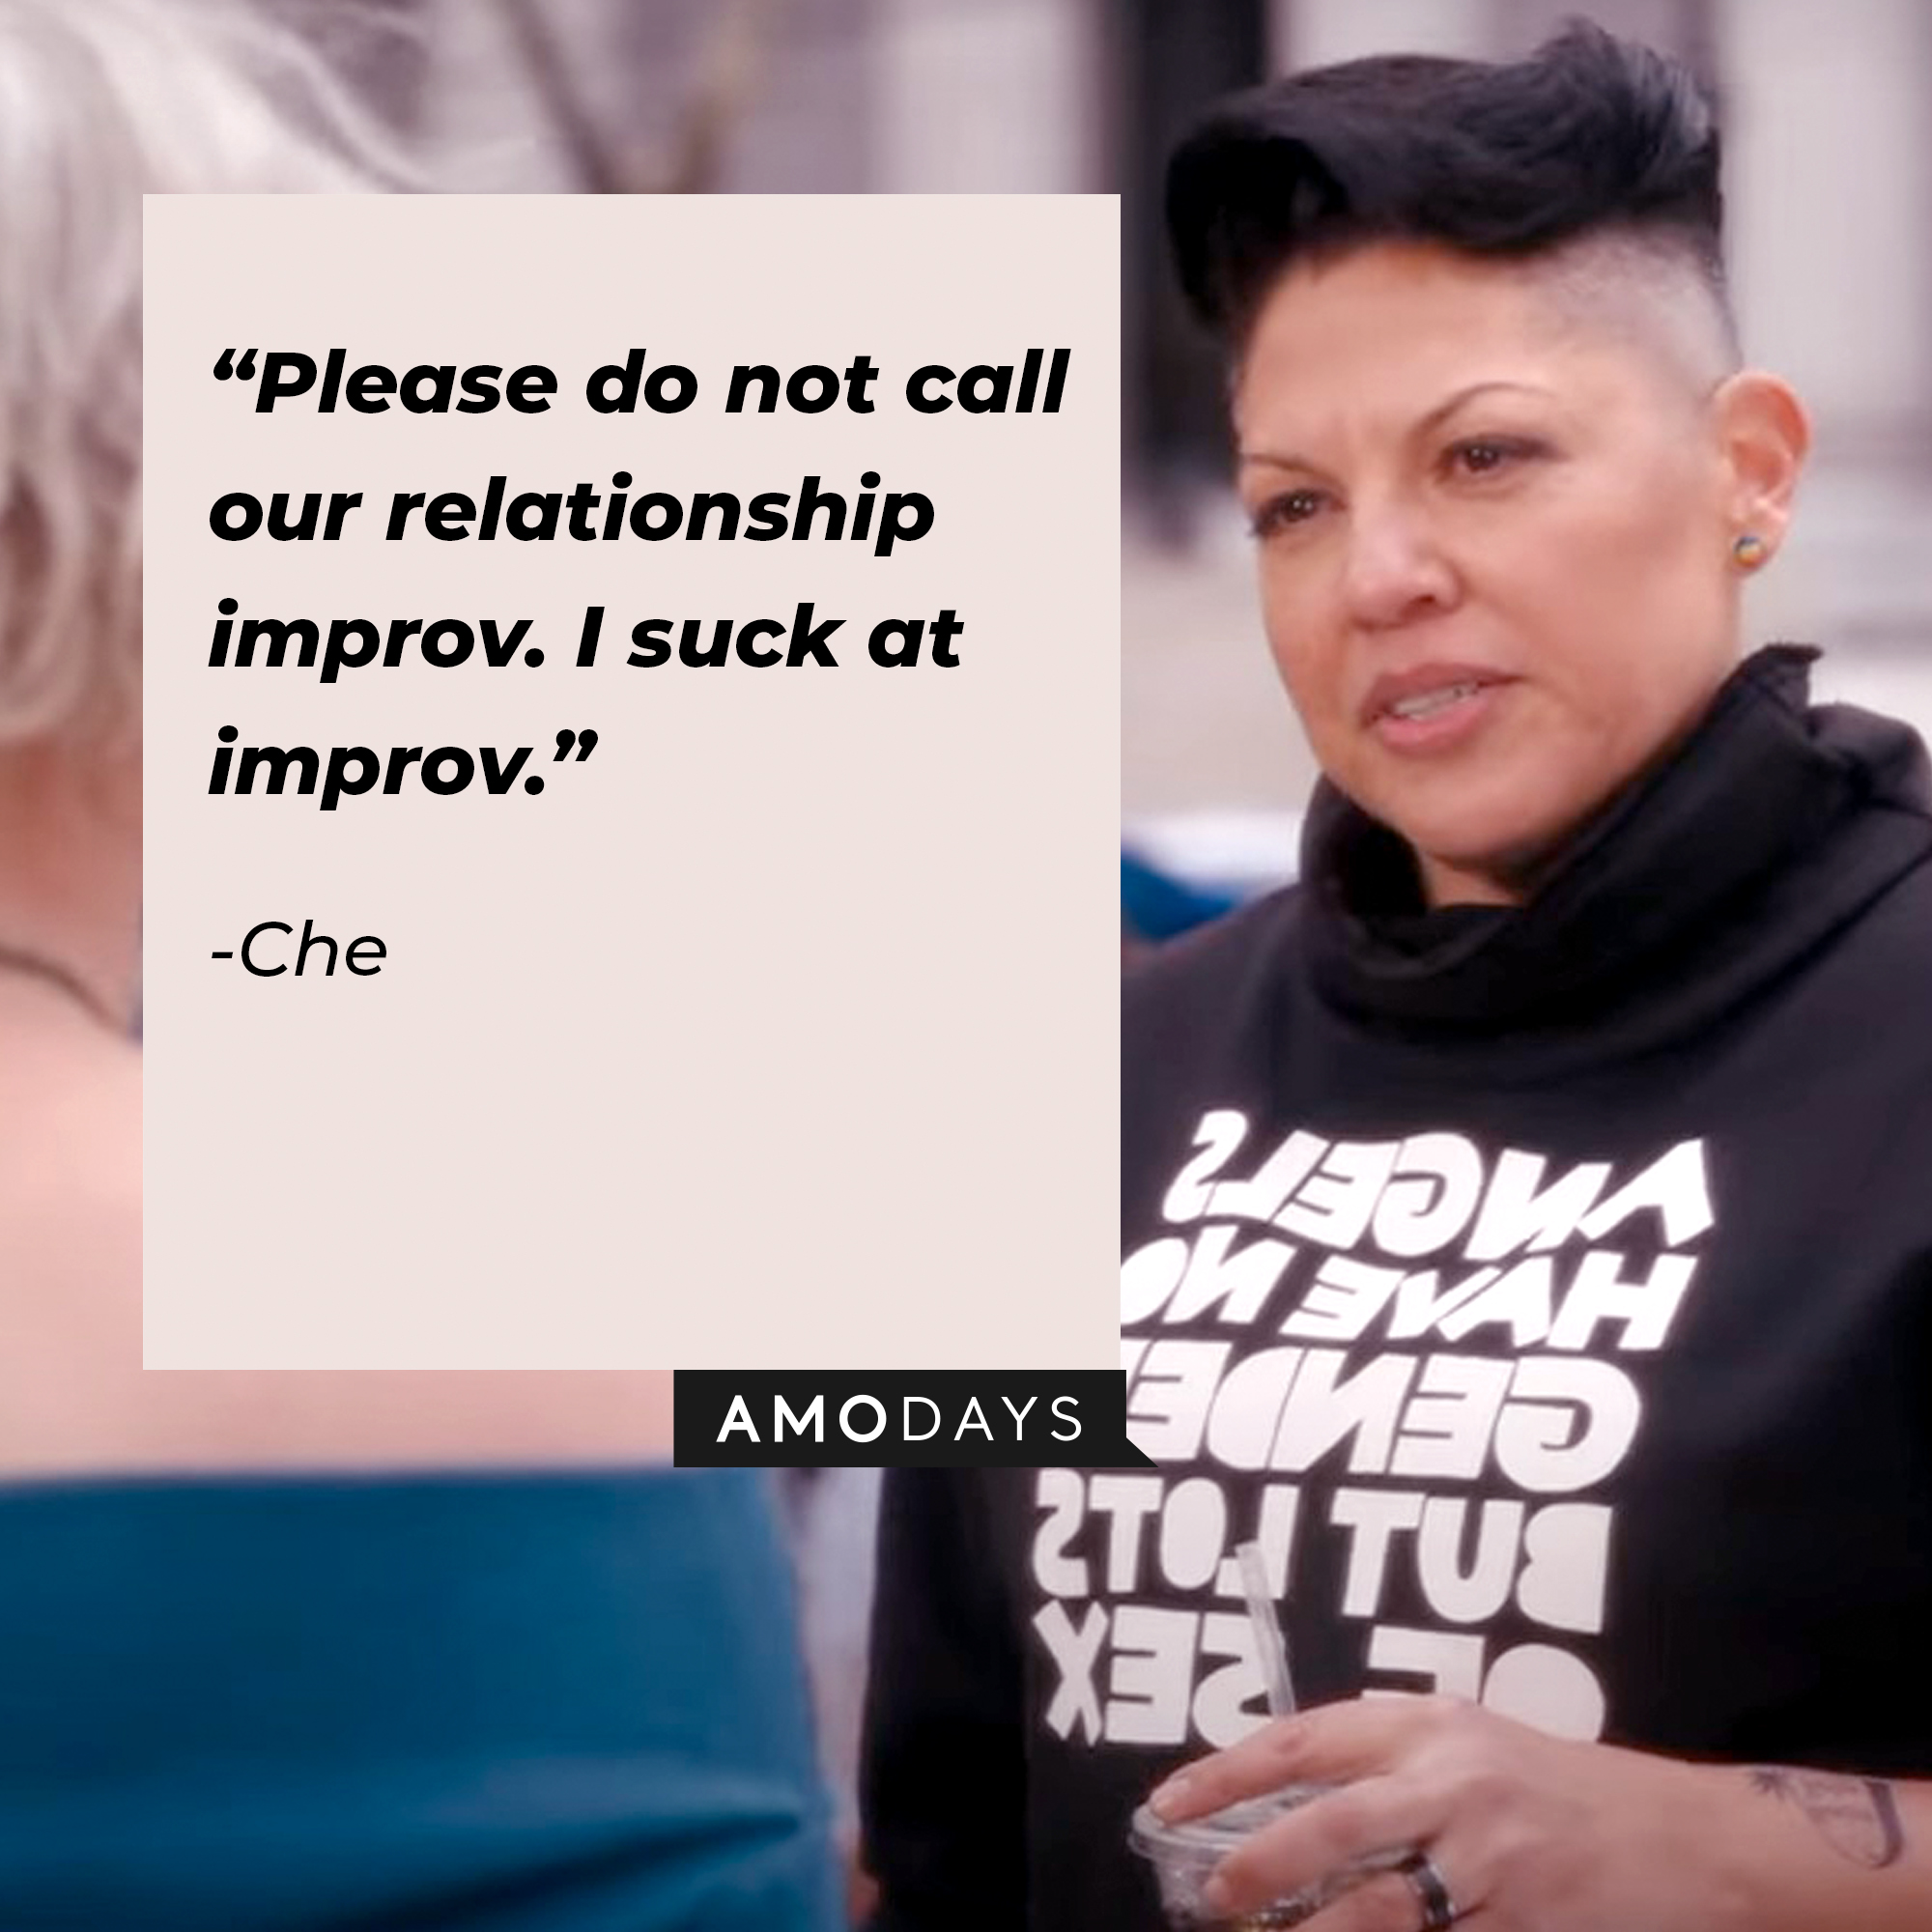 An image of Che with her quote: “Please do not call our relationship improv. I suck at improv.” | facebook.com/justlikethatmax